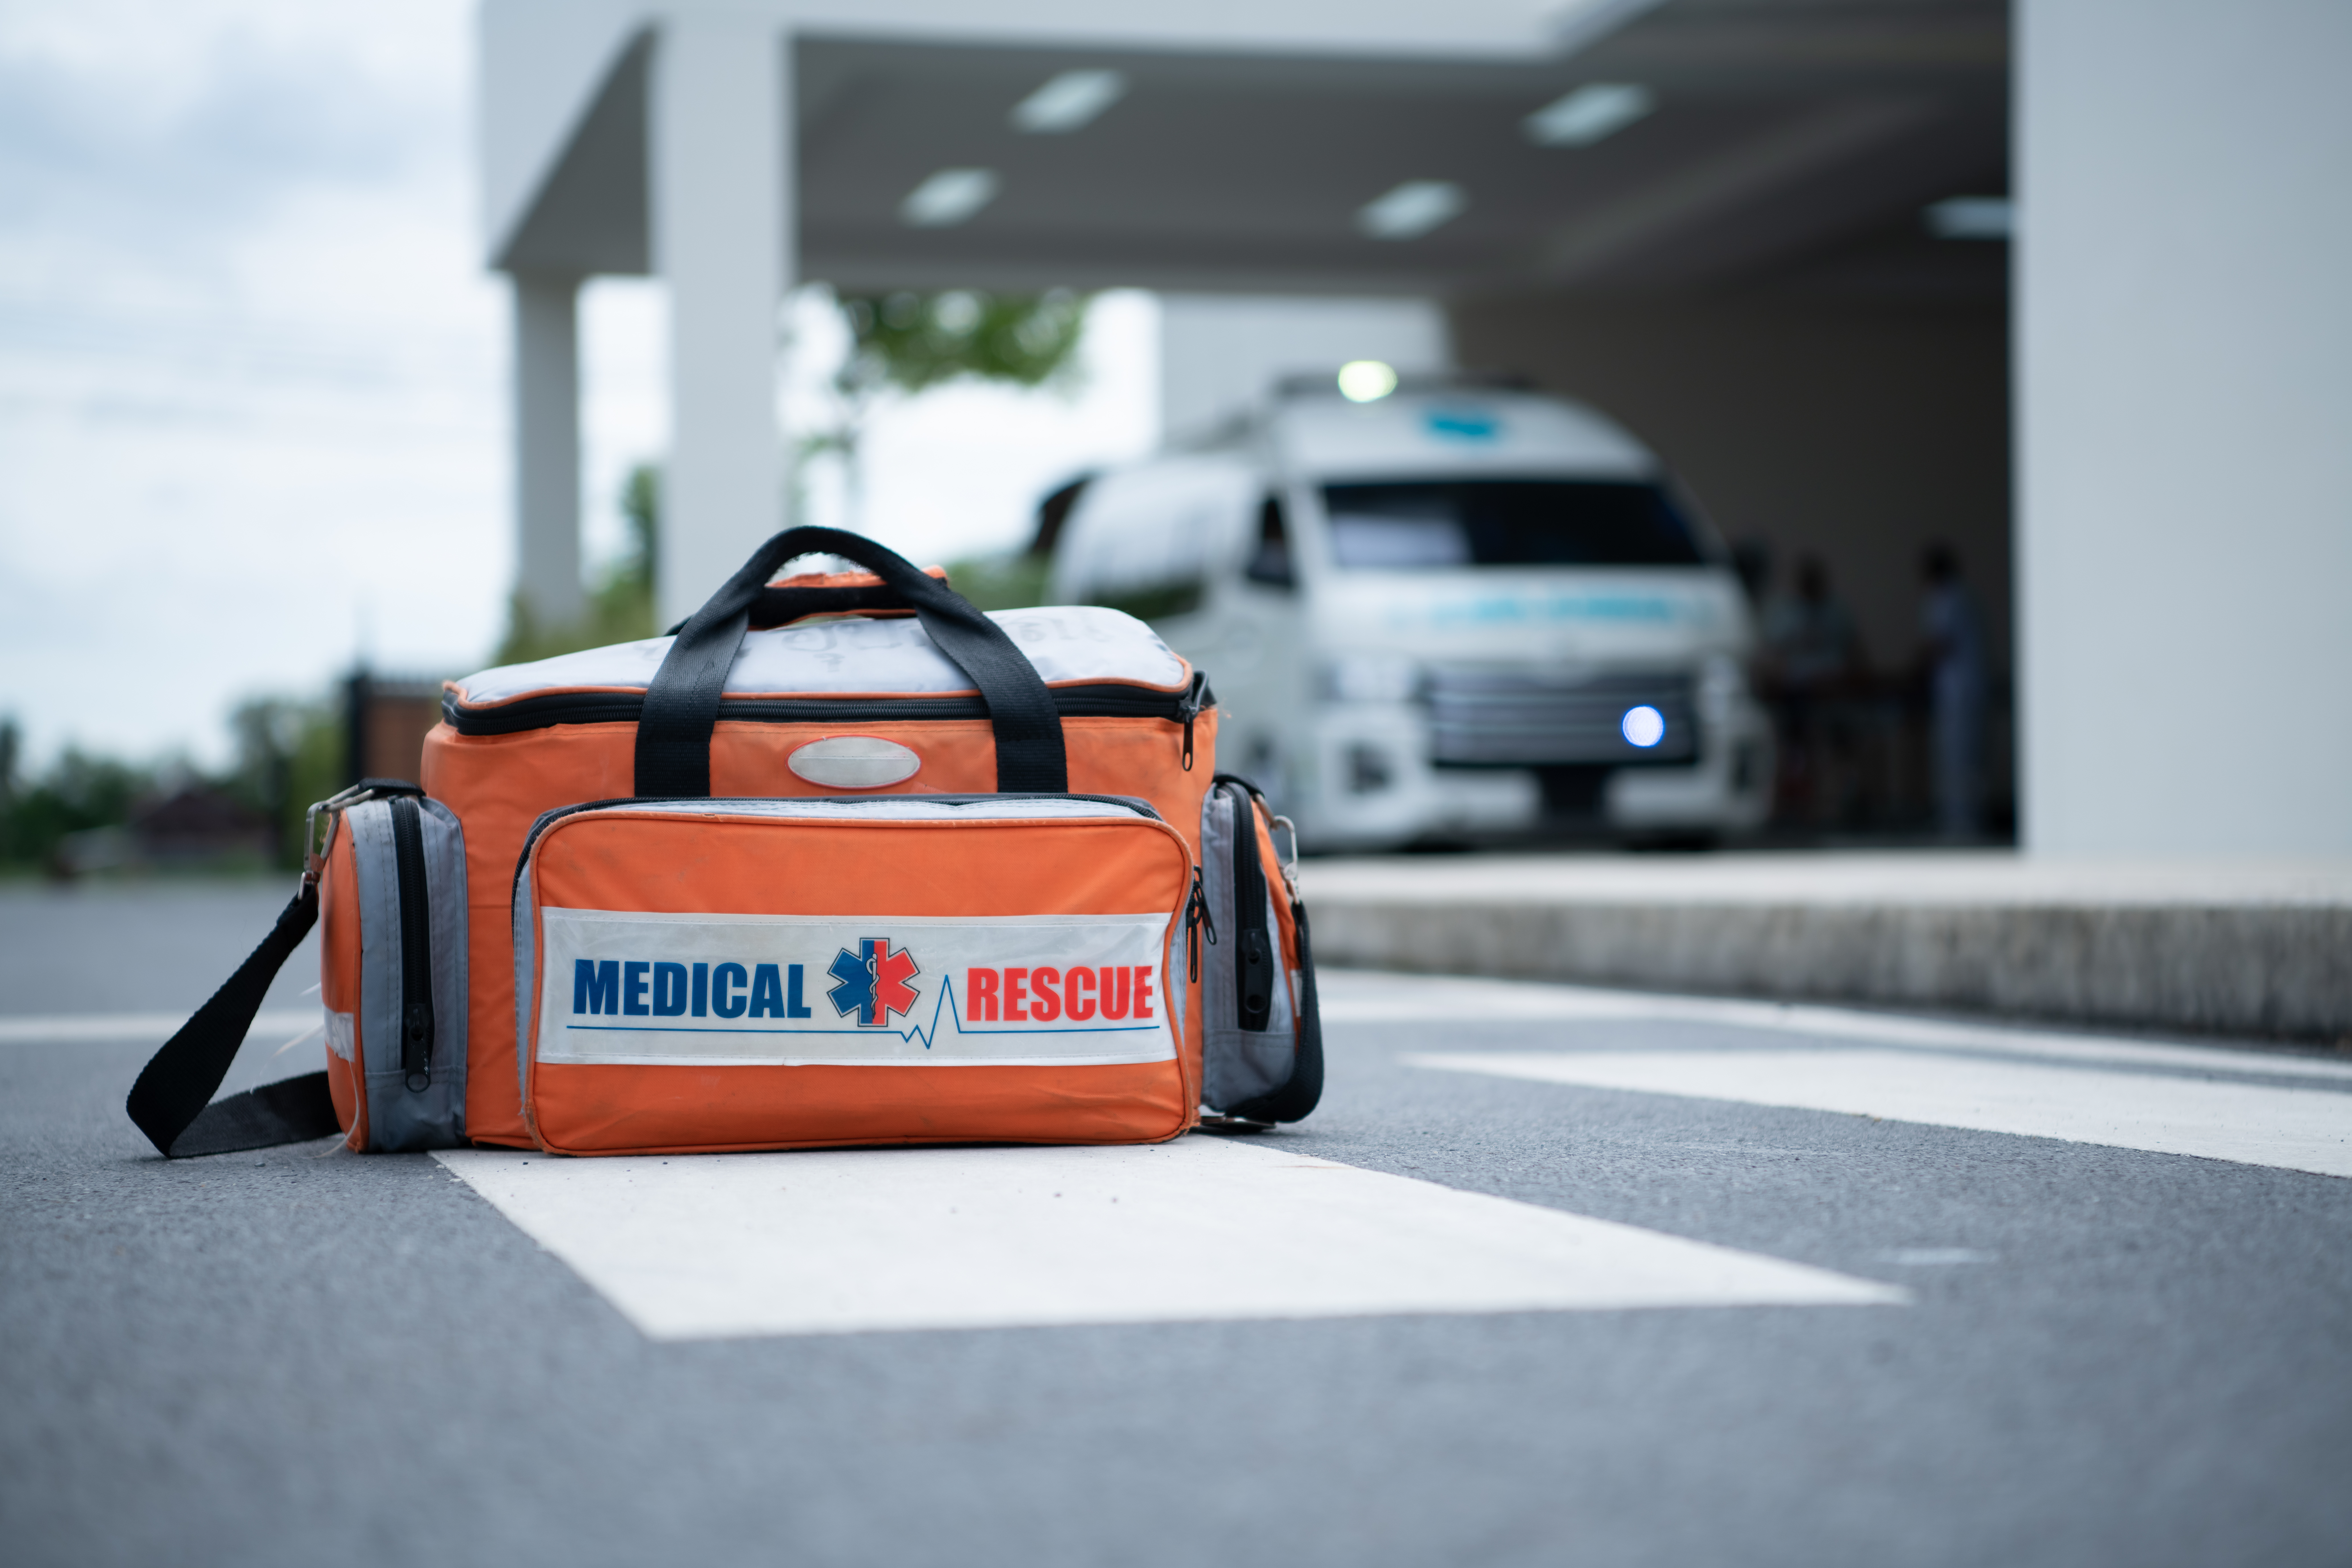 First aid bag, For the medical team who perform first aid in accidents in the ambulance